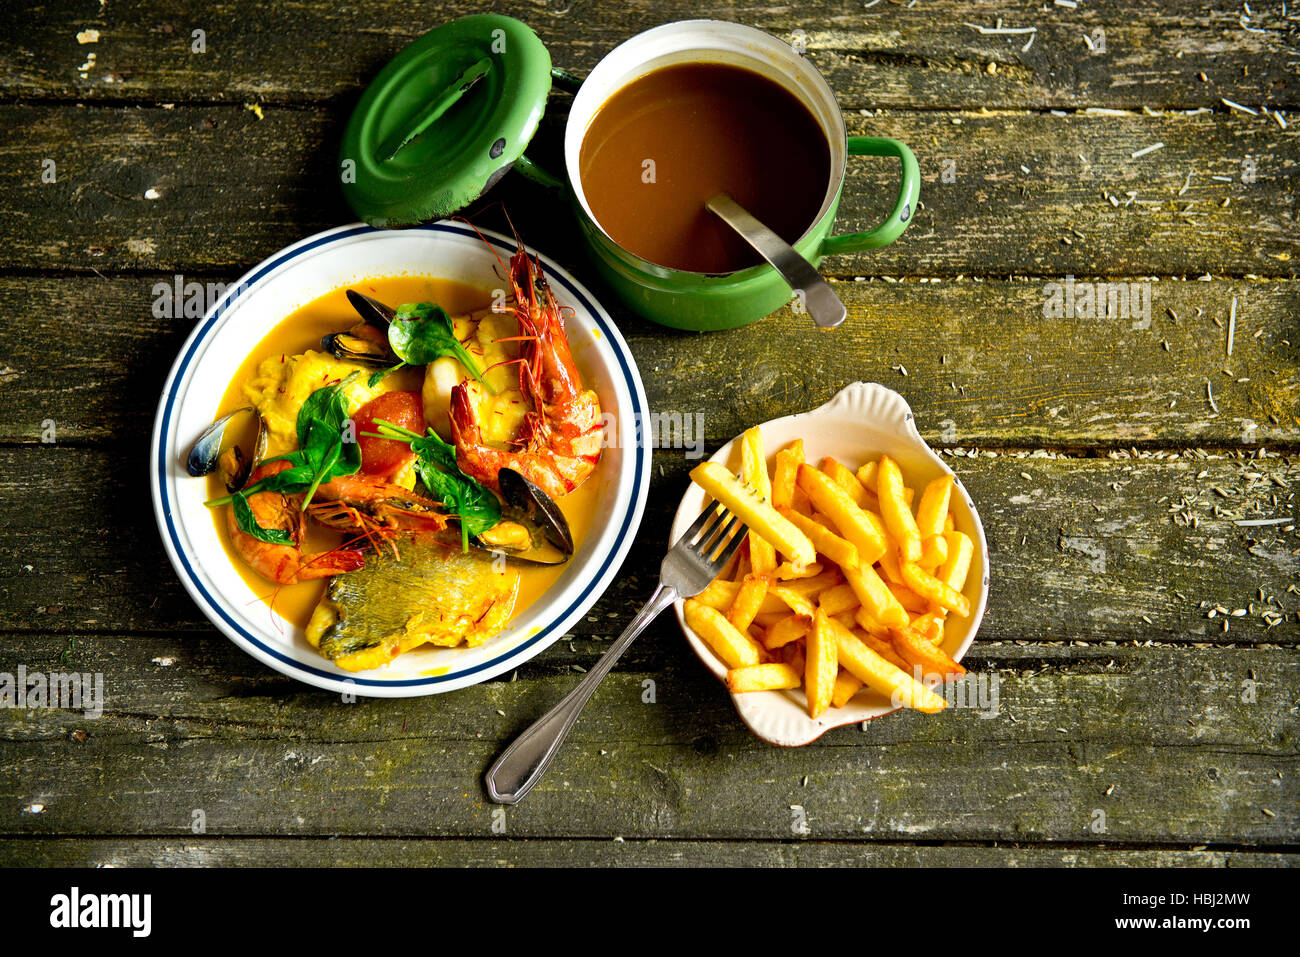 french fries and fishsoup Stock Photo